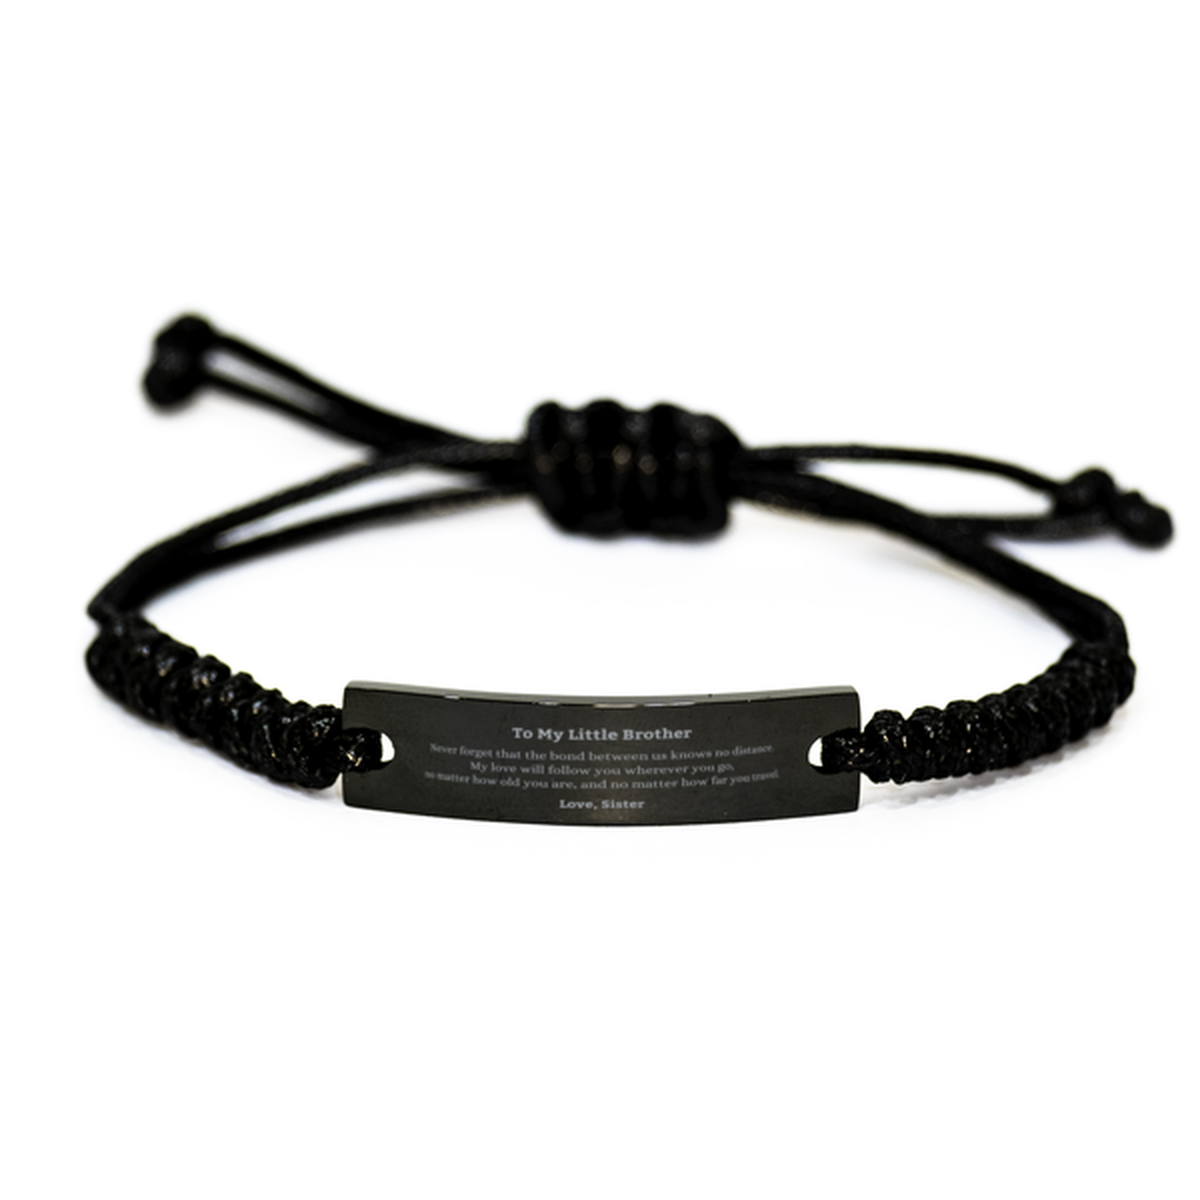 Little Brother Birthday Gifts from Sister, Adjustable Black Rope Bracelet for Little Brother Christmas Graduation Unique Gifts Little Brother Never forget that the bond between us knows no distance. Love, Sister